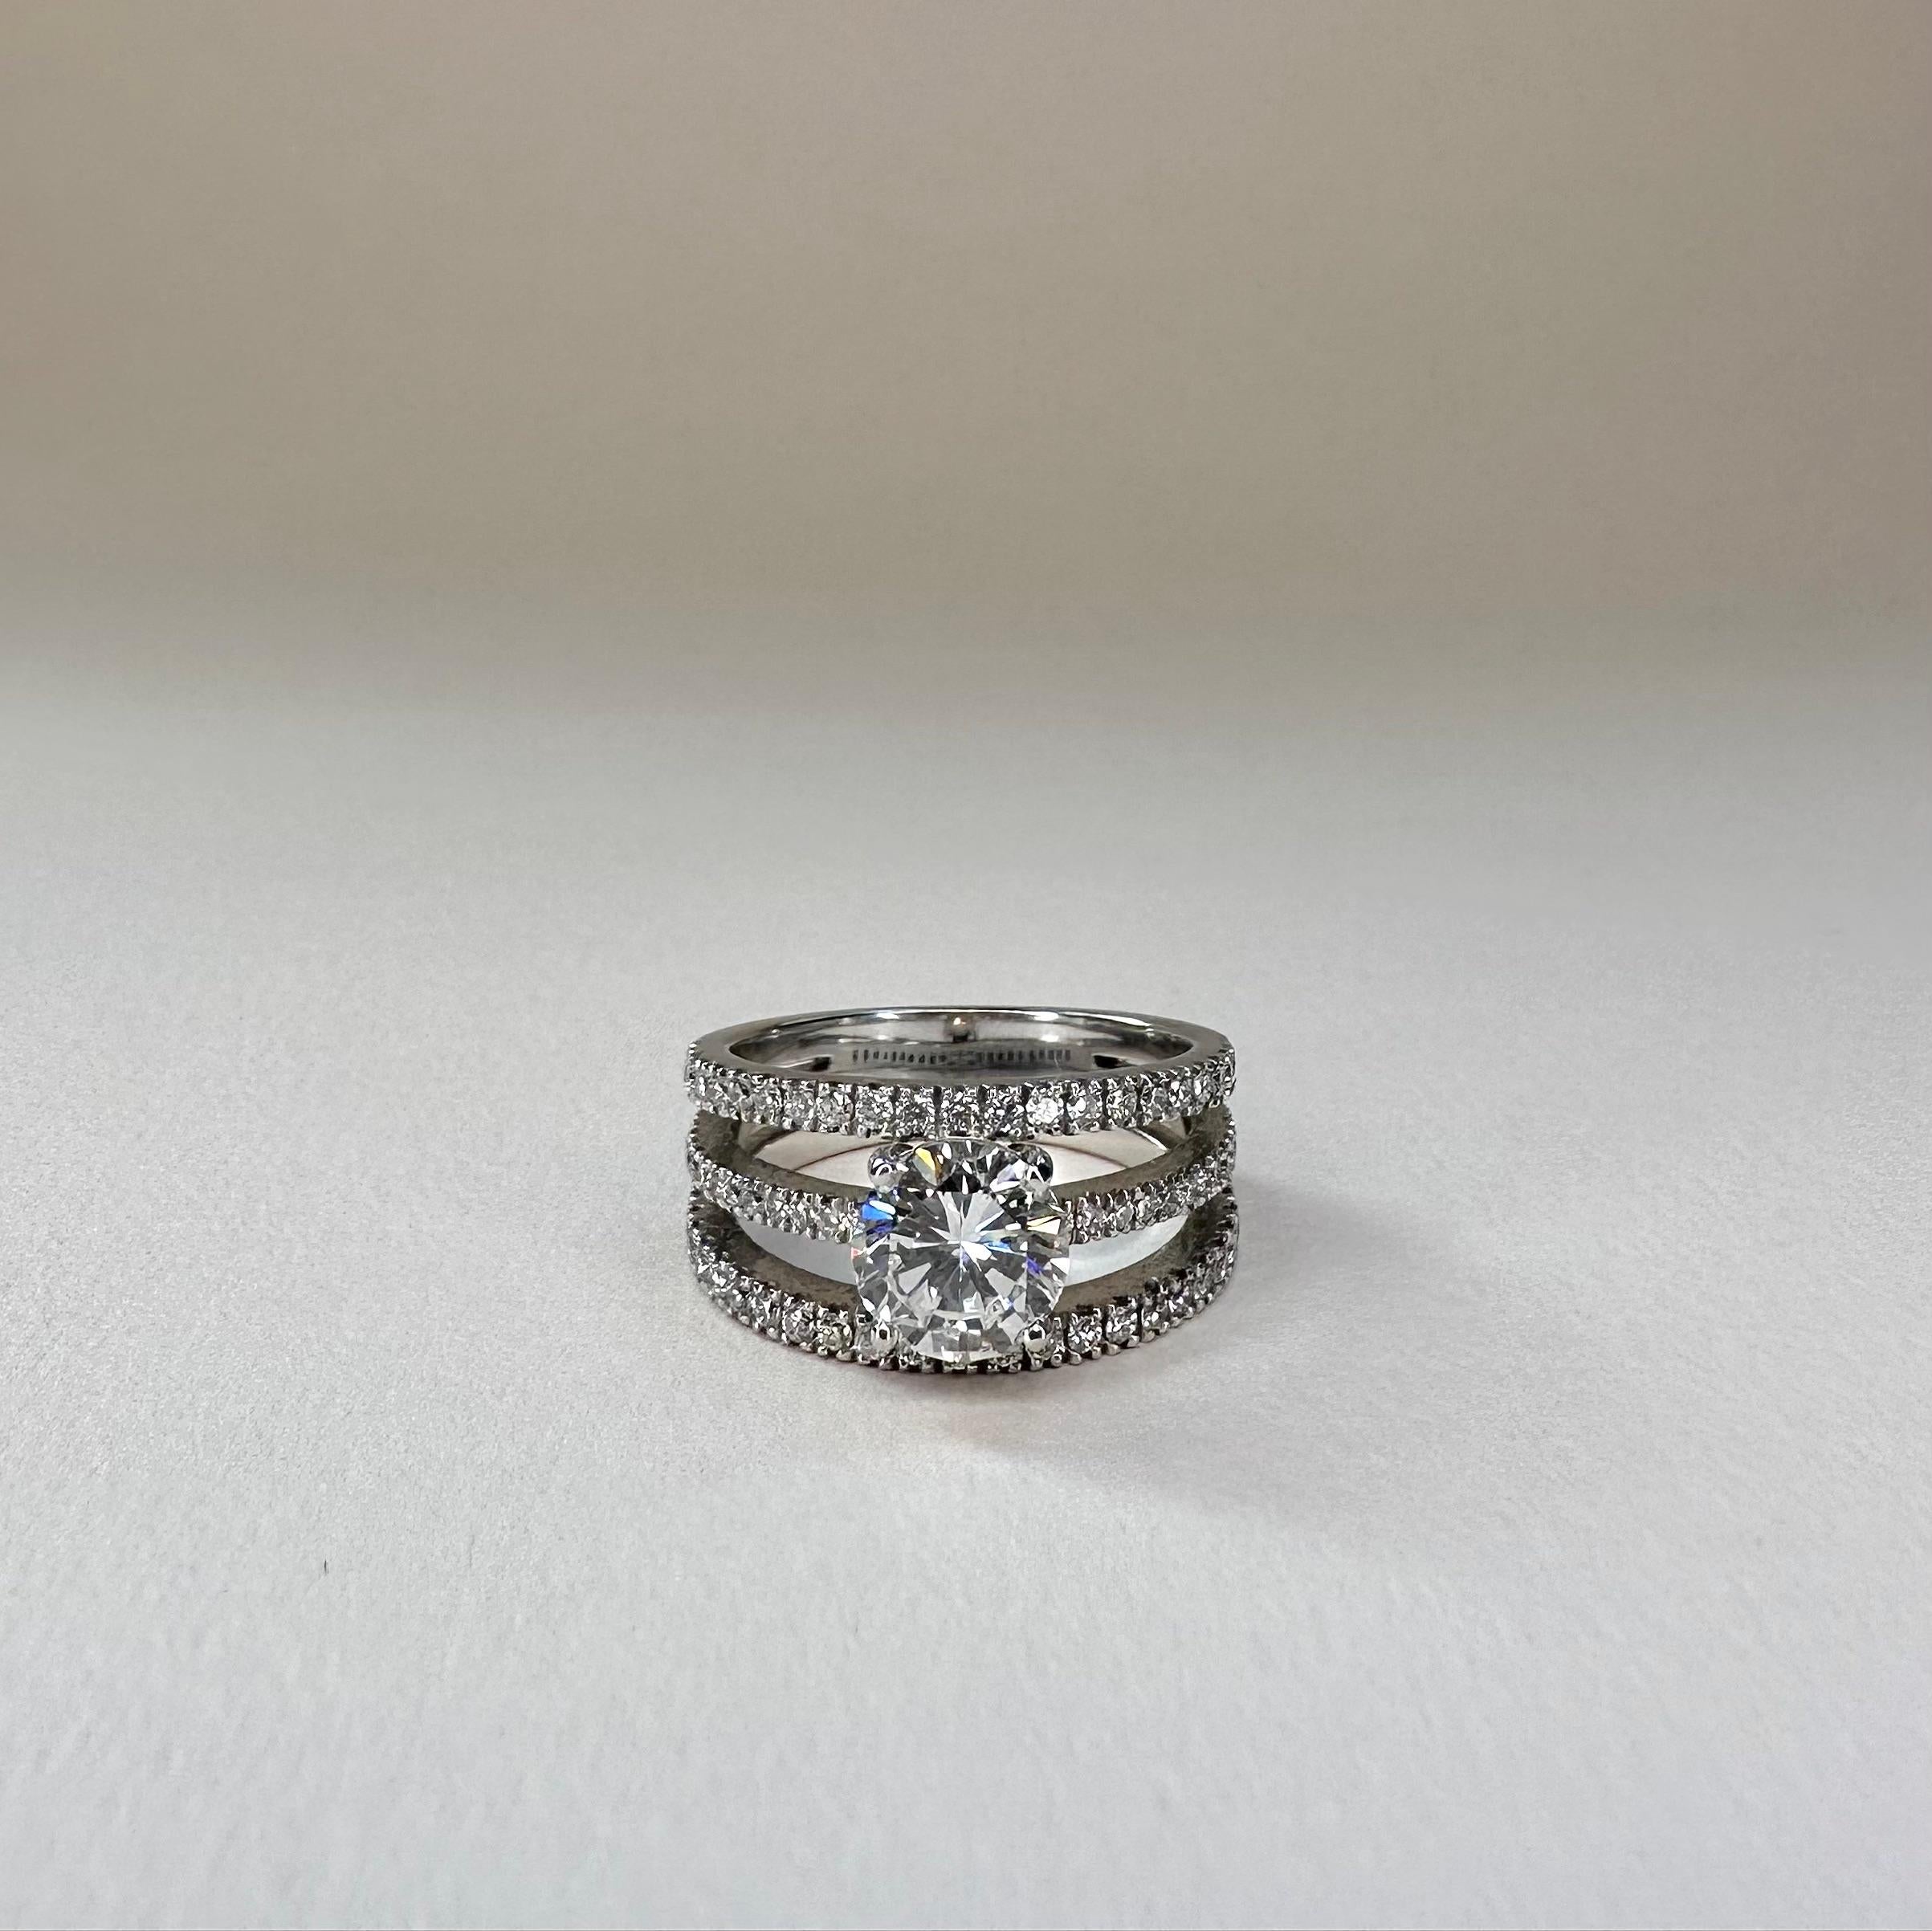 For Sale:  18k White Gold Triple Band Ring Carats GIA Certified Ct Diamond set with 4